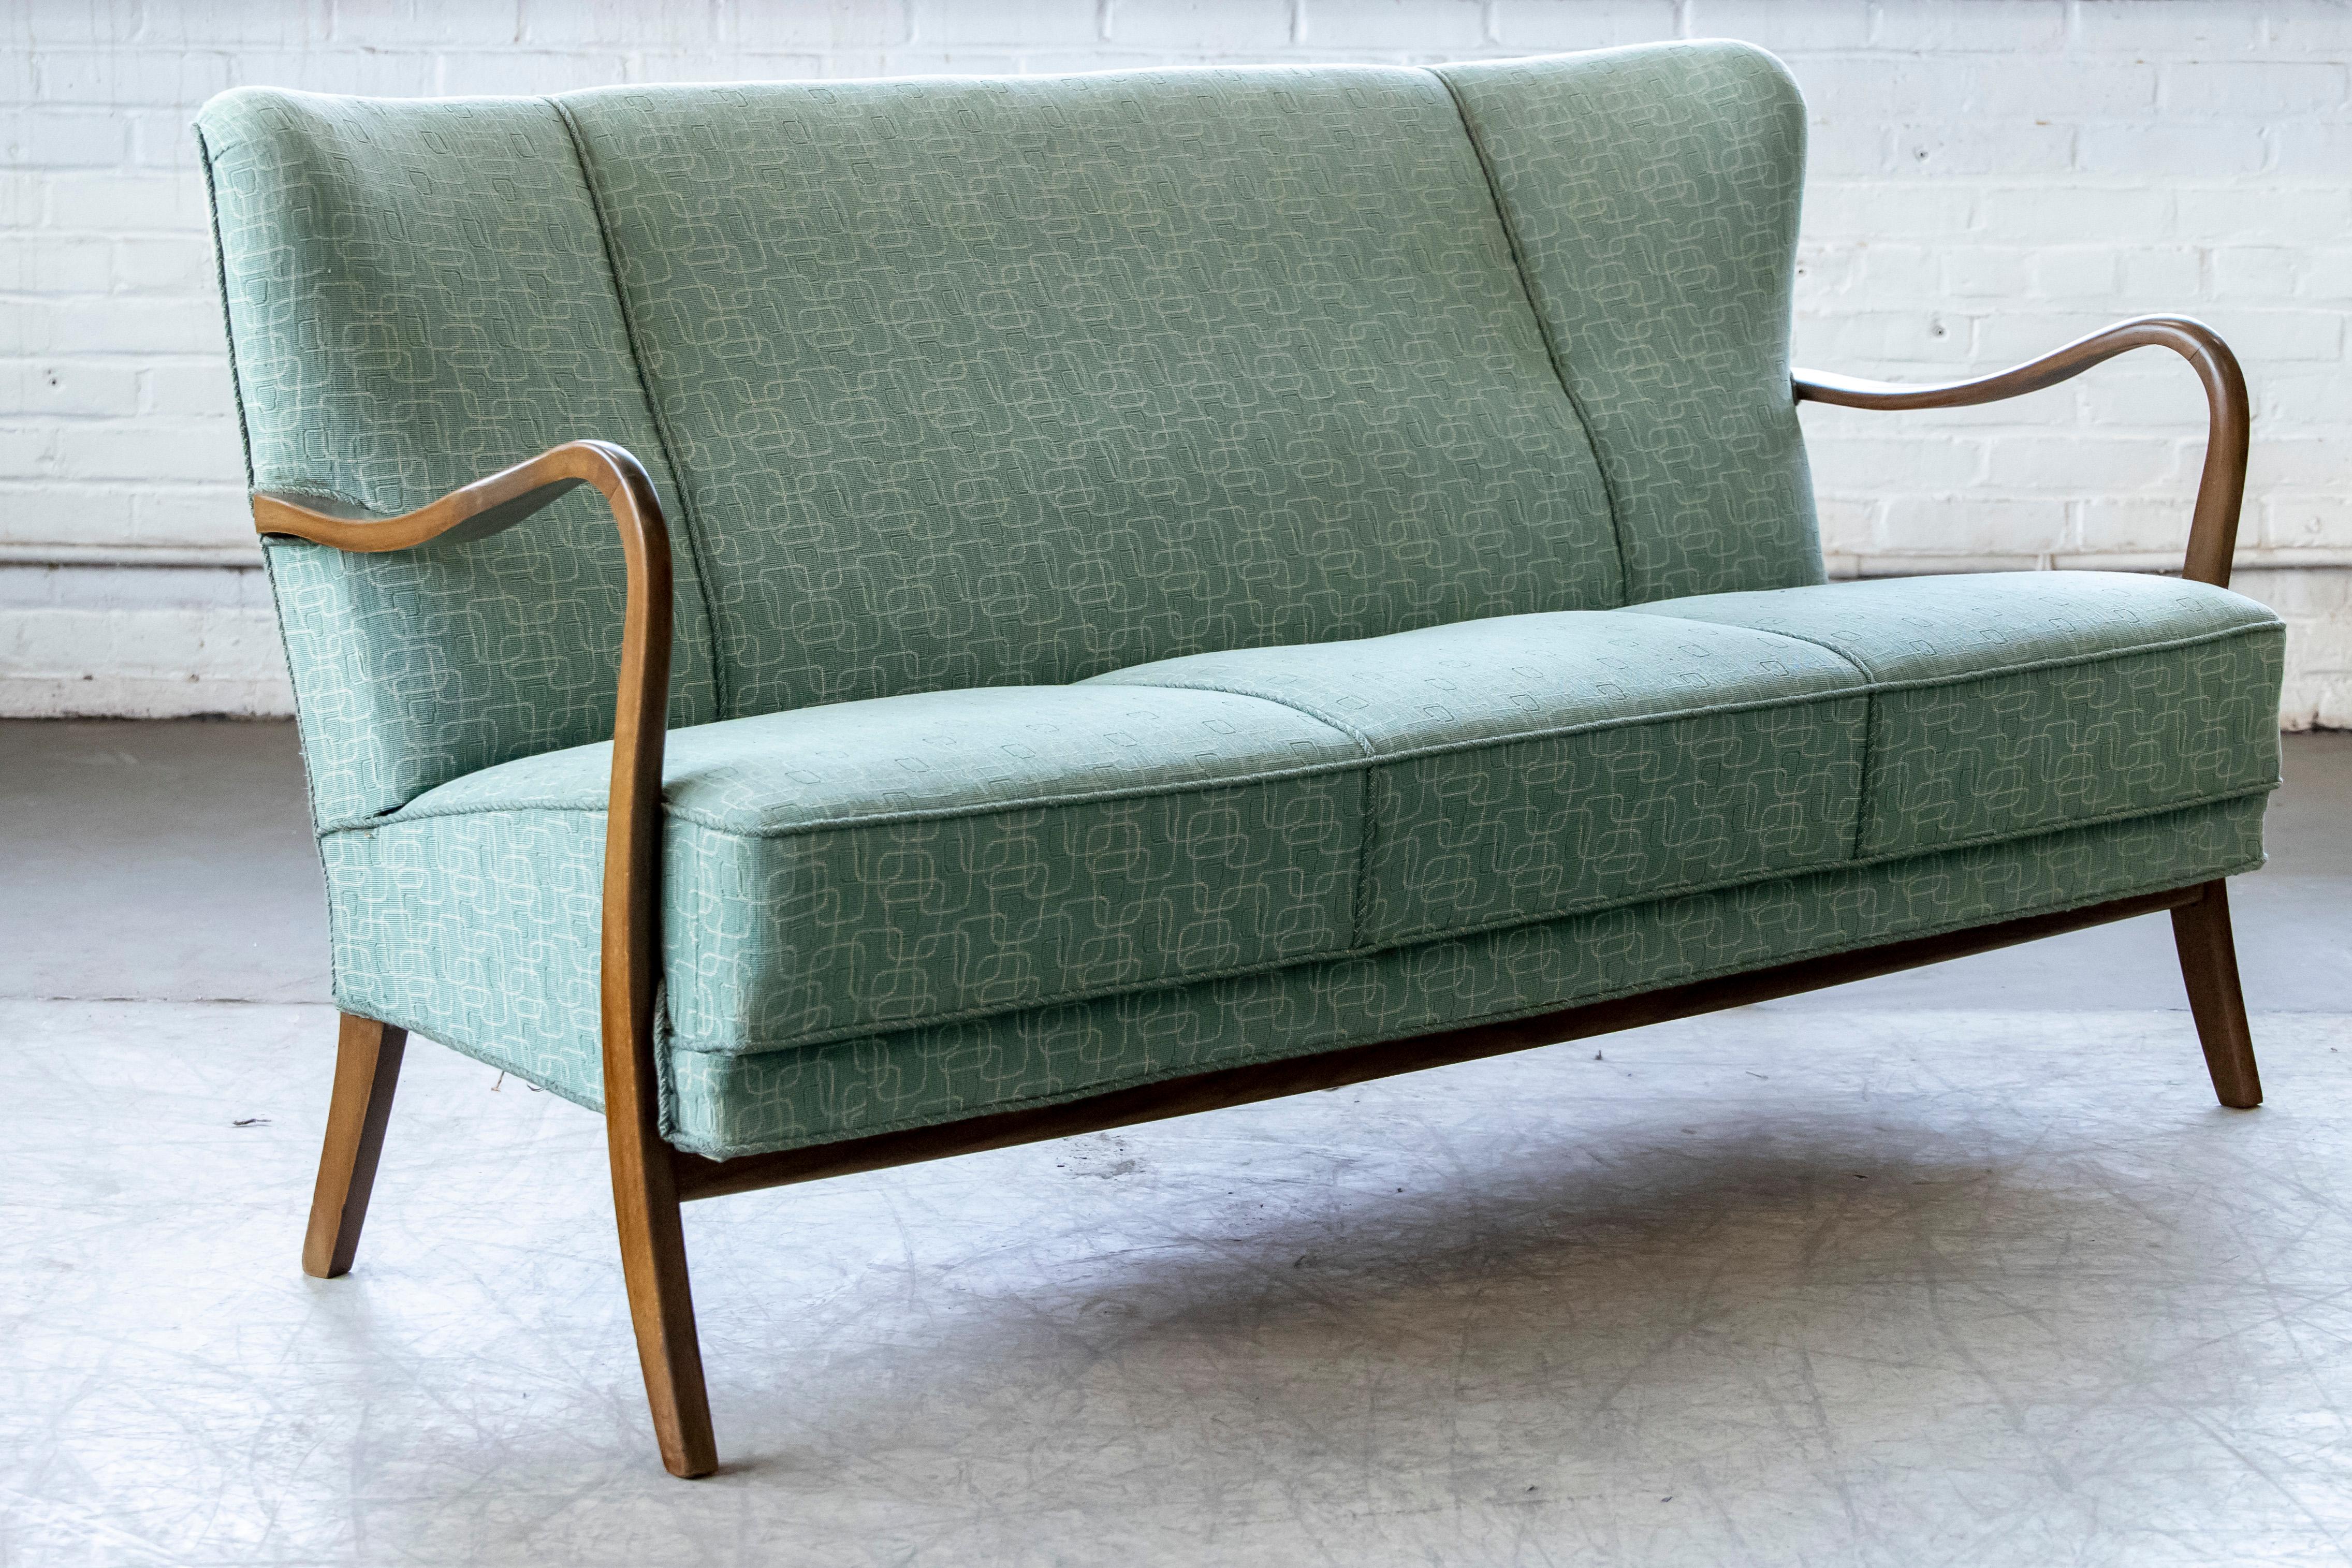 Fantastic 1940s Alfred Christensen designed sofa in his characteristic style of open armrests carved from solid beech wood and made by Slagelse Mobelvaerk in the 1940s. Beautiful refined lines with curving arms that extend into the front leg. Coil